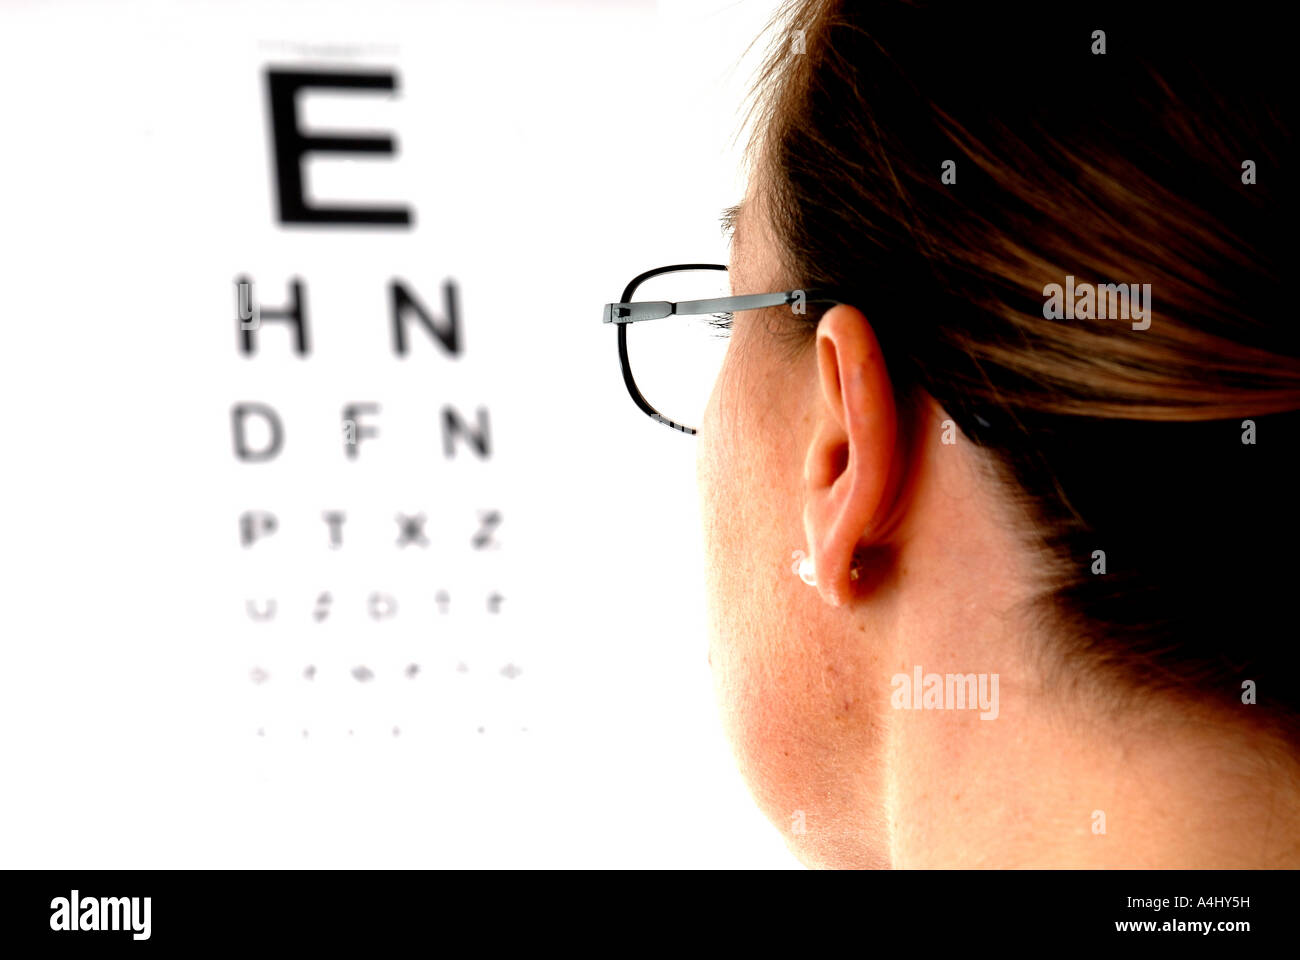 Reading Vision Test Chart